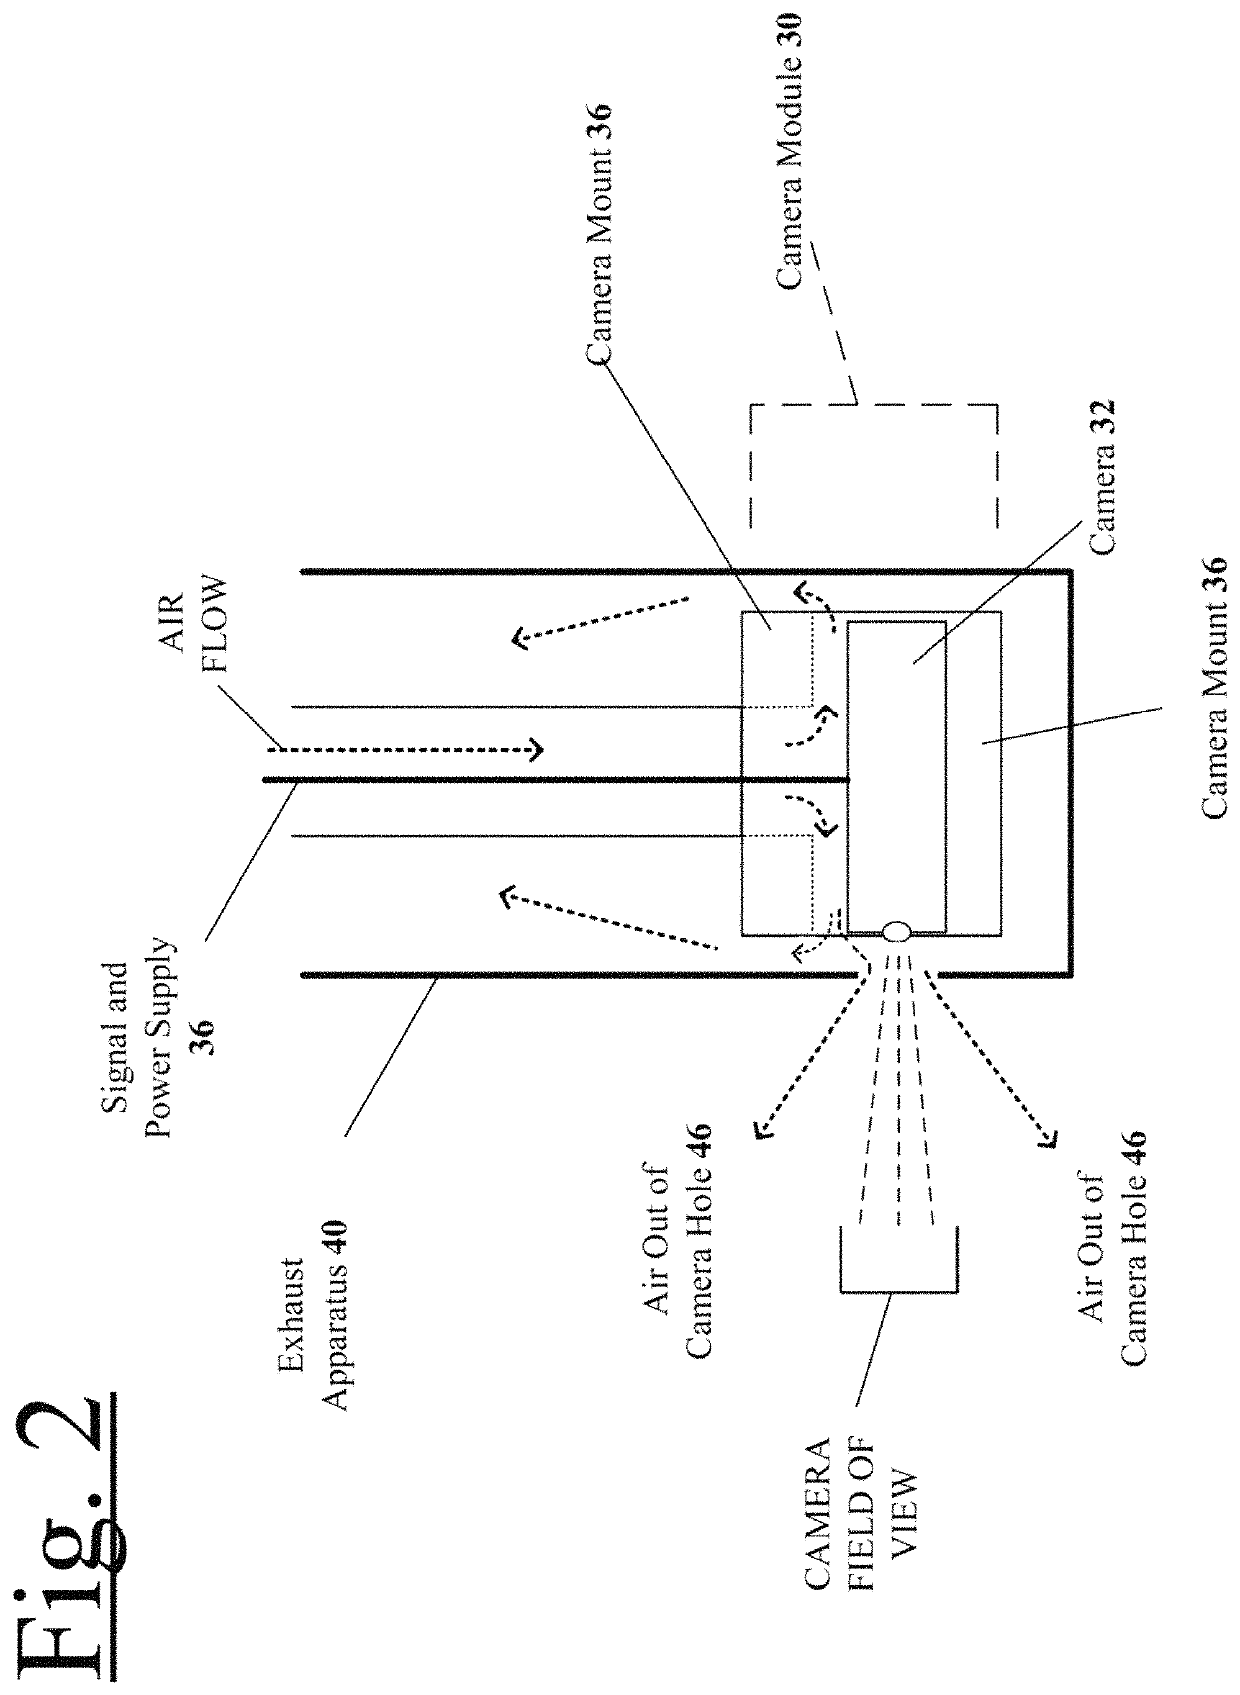 Camera enclosure for harsh commercial environments and method for using same